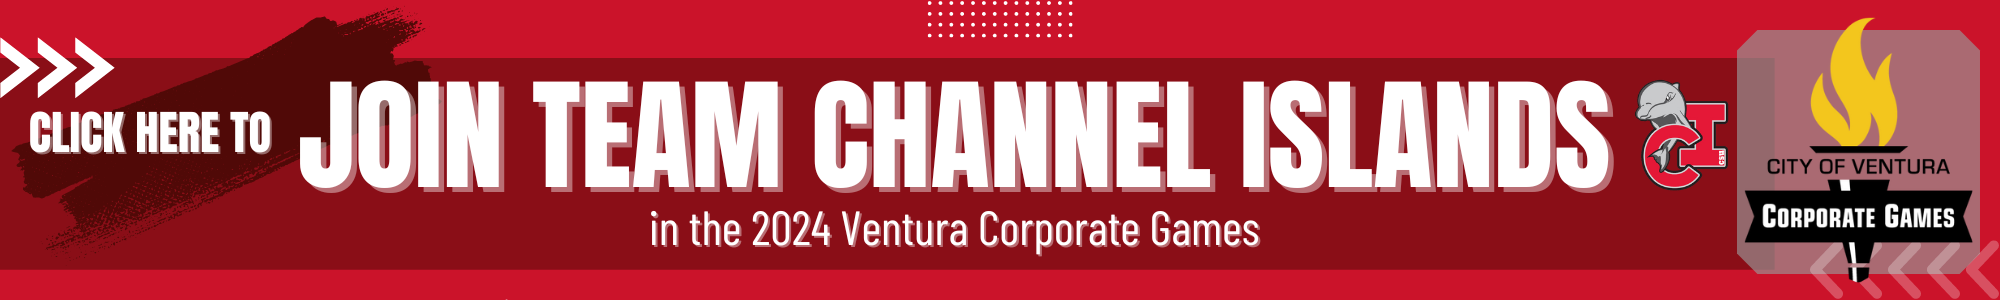 Click here to join Team Channel Islands in the 2024 Ventura Corporate Games